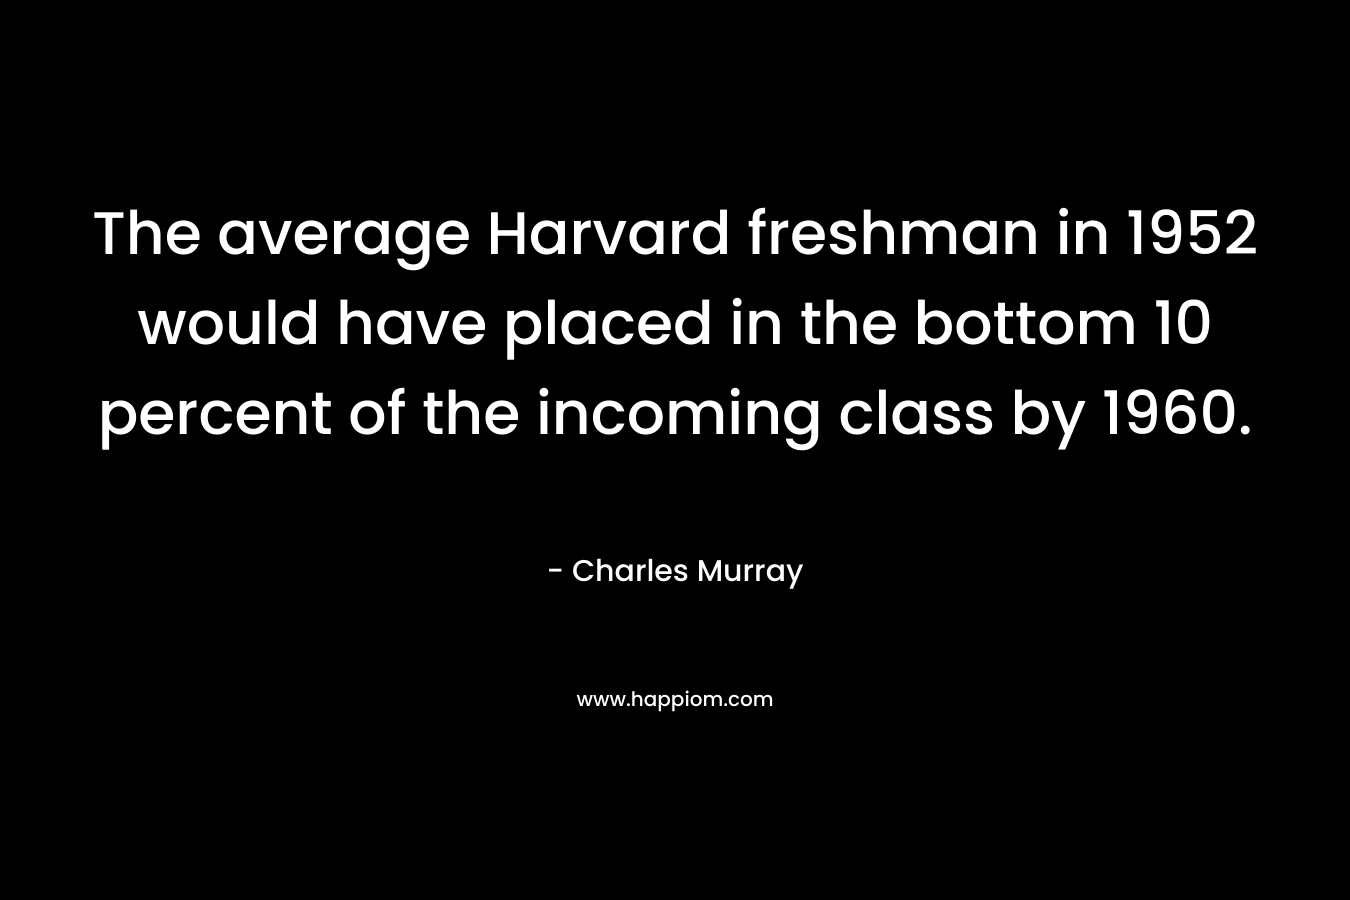 The average Harvard freshman in 1952 would have placed in the bottom 10 percent of the incoming class by 1960. – Charles Murray